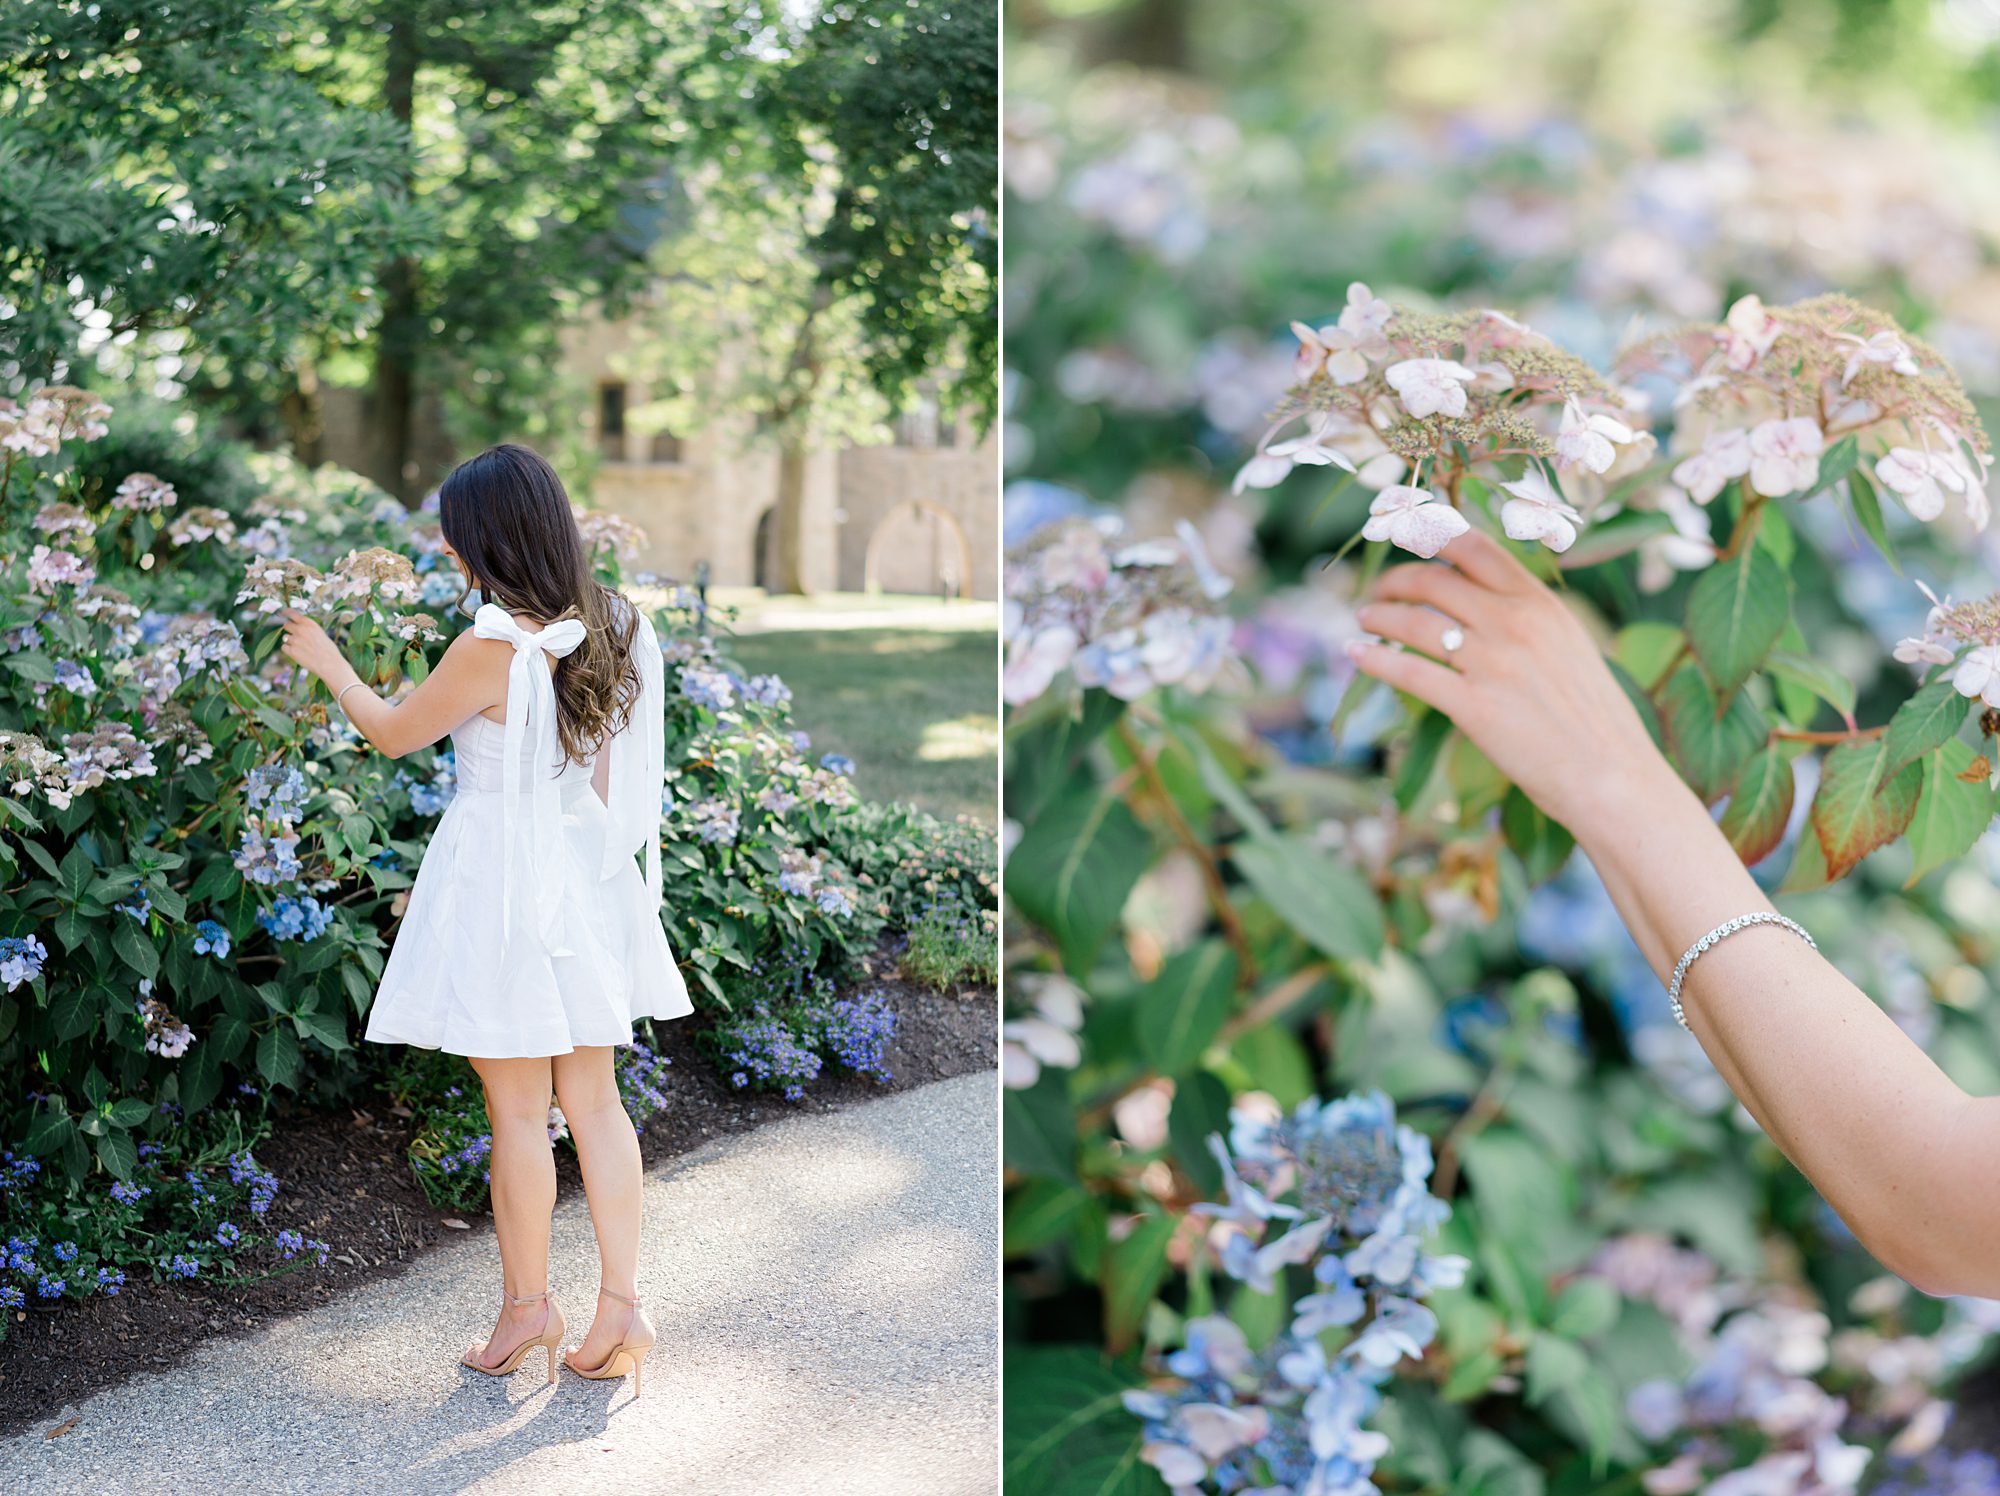 woman picks flowers and shows off engagement ring during PA engagement session